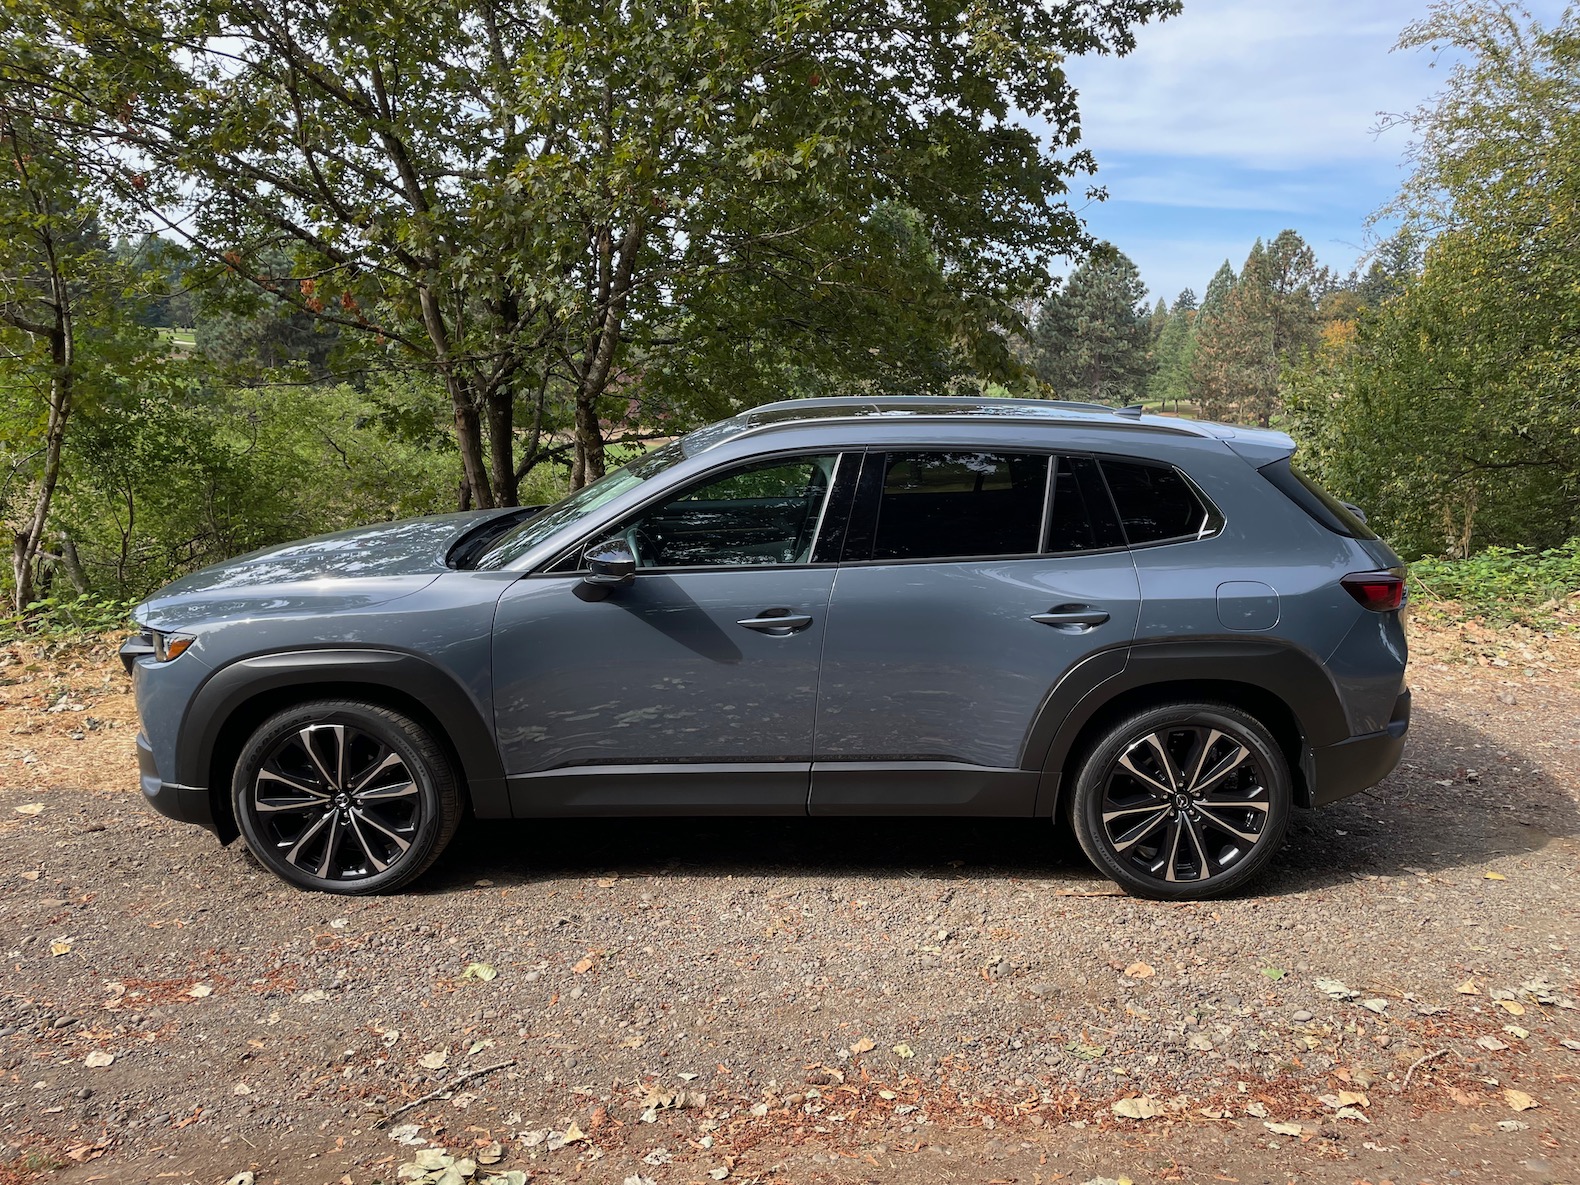 2023 Mazda CX-50 Review: Boldly Going Upmarket - The Torque Report